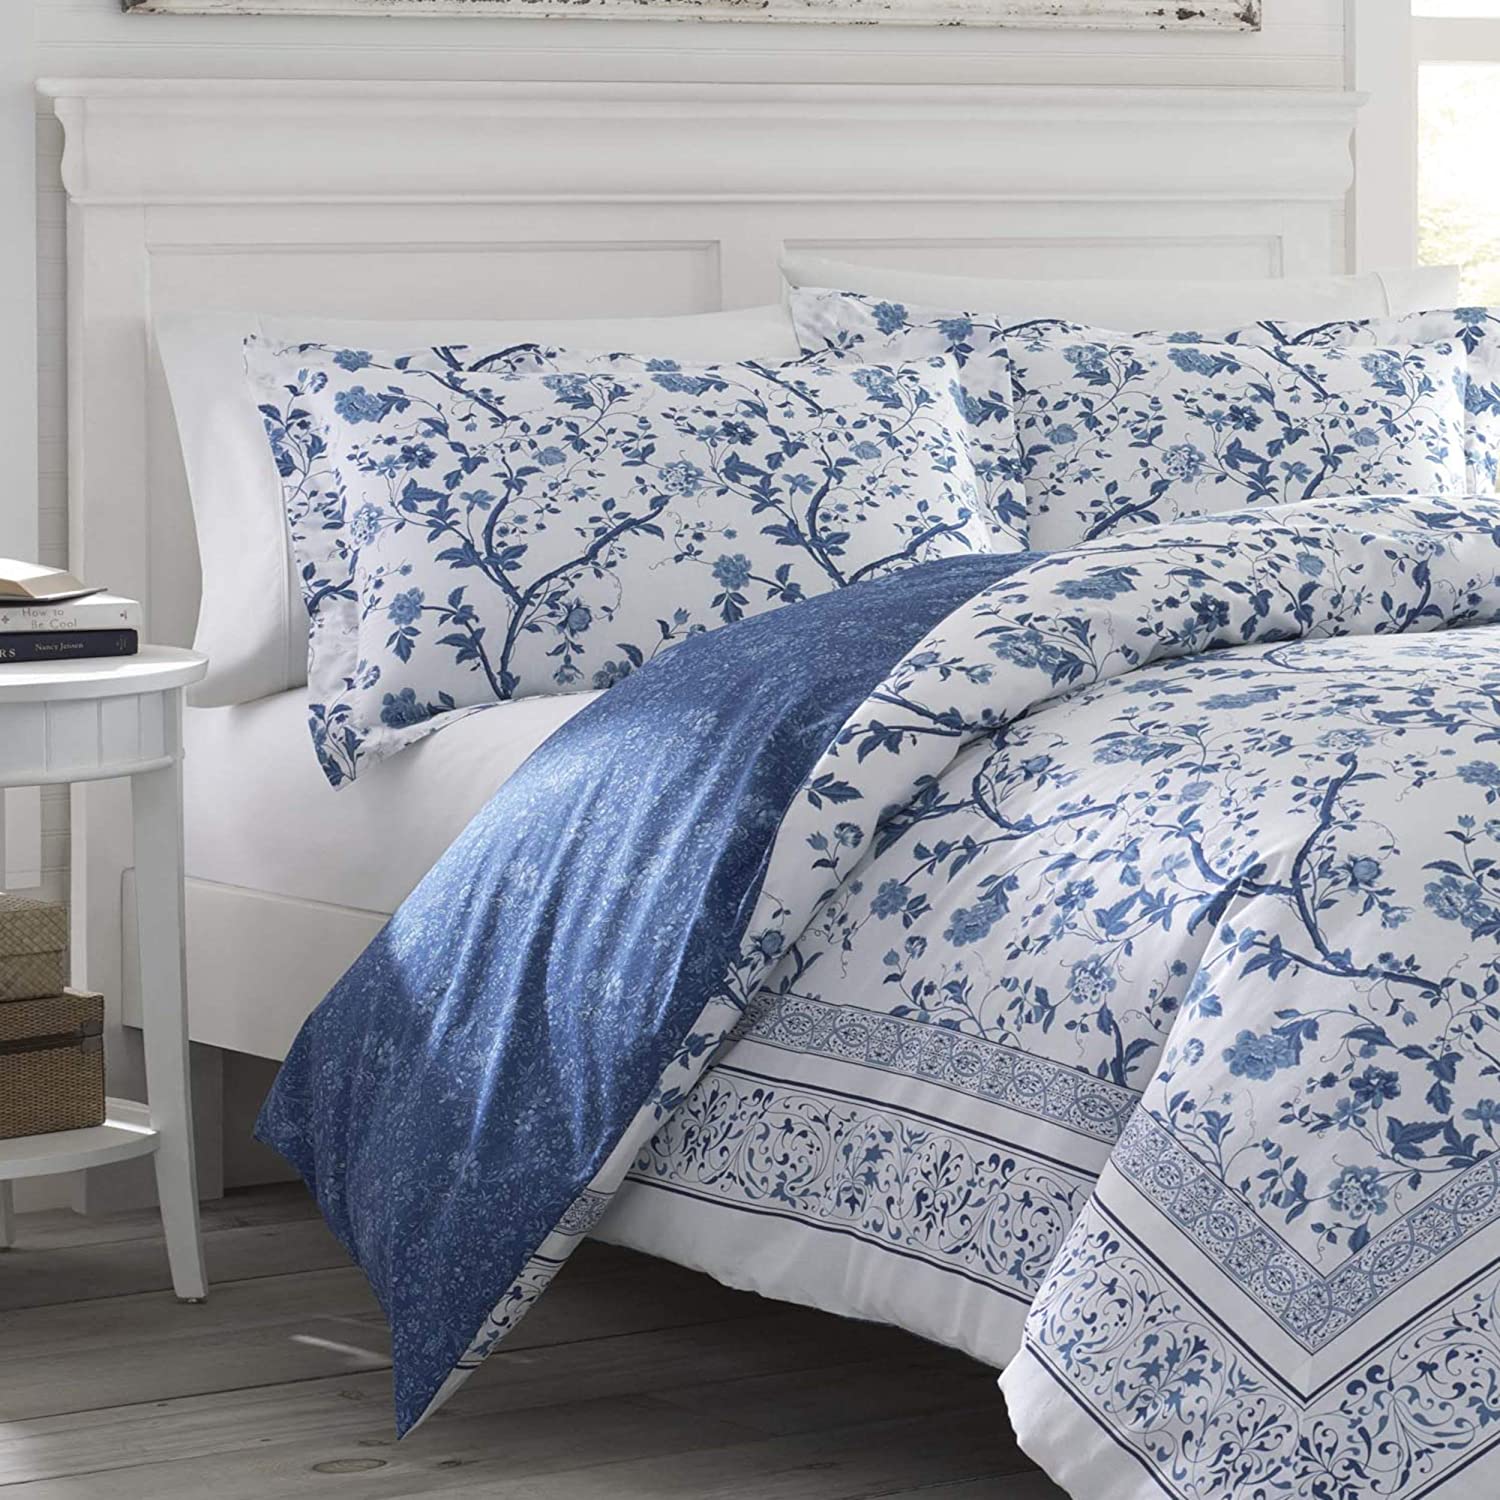 Laura Ashley Home Charlotte Collection Luxury Ultra Soft Comforter All Seas Ebay 